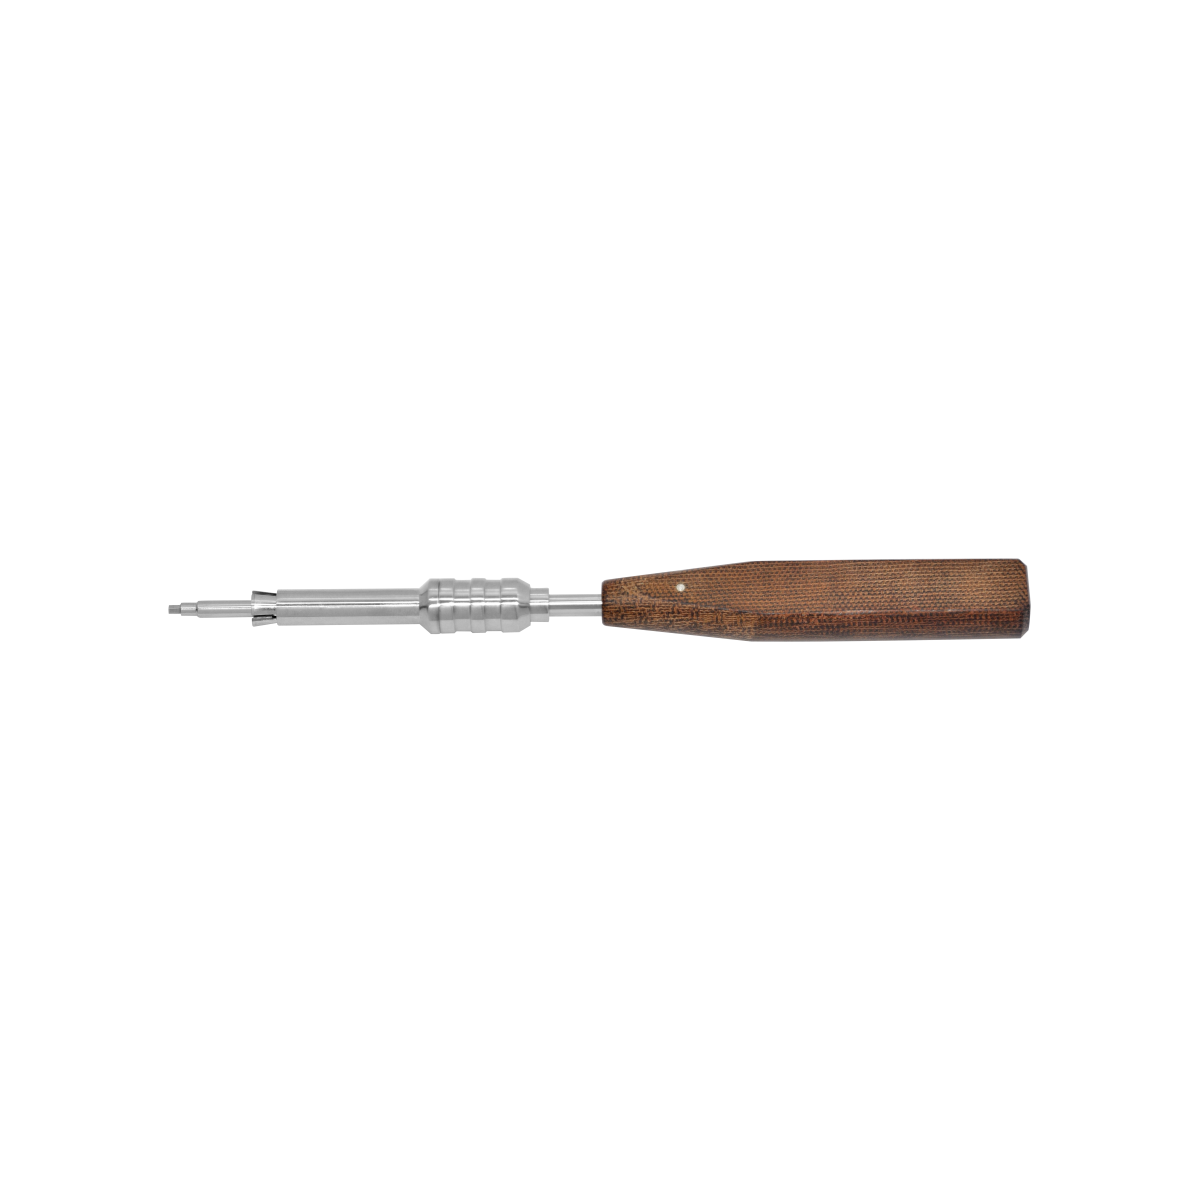 Hexagonal-Screw-Driver-With-Self-Holding-Sleeve-2.0mm-Tip-for-2.4mm-Cortical-Locking-2.7mm-Locking-screws.png